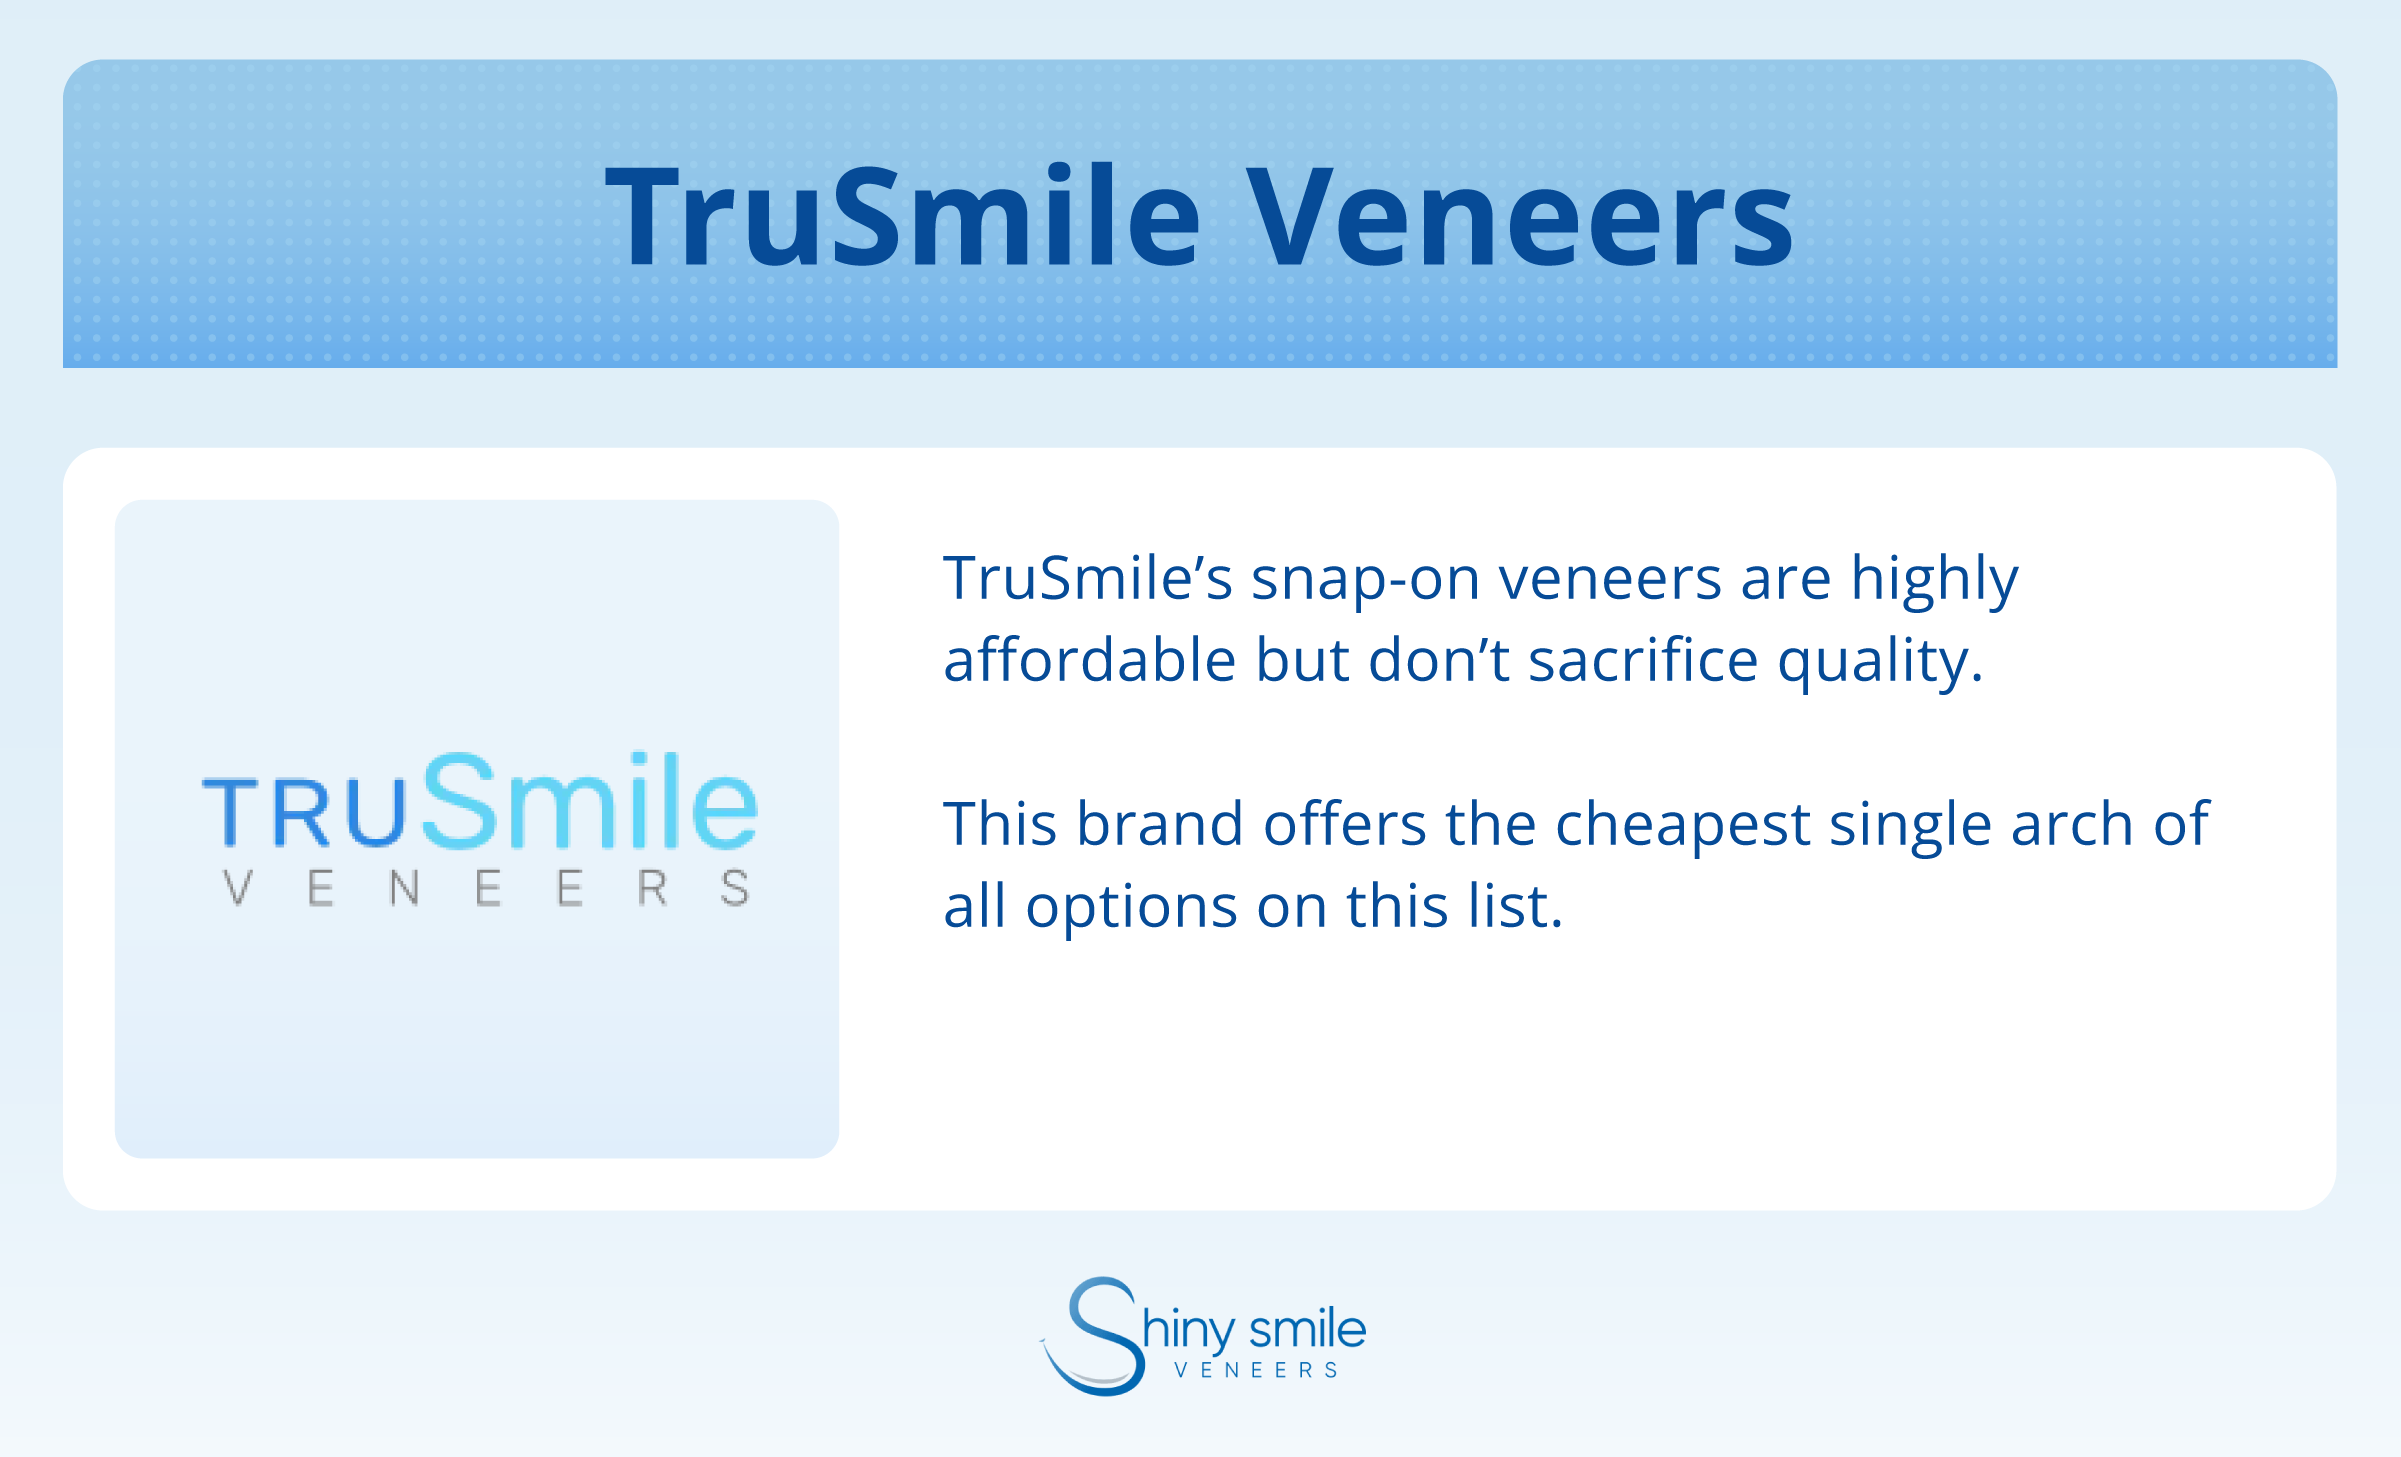 about TruSmile